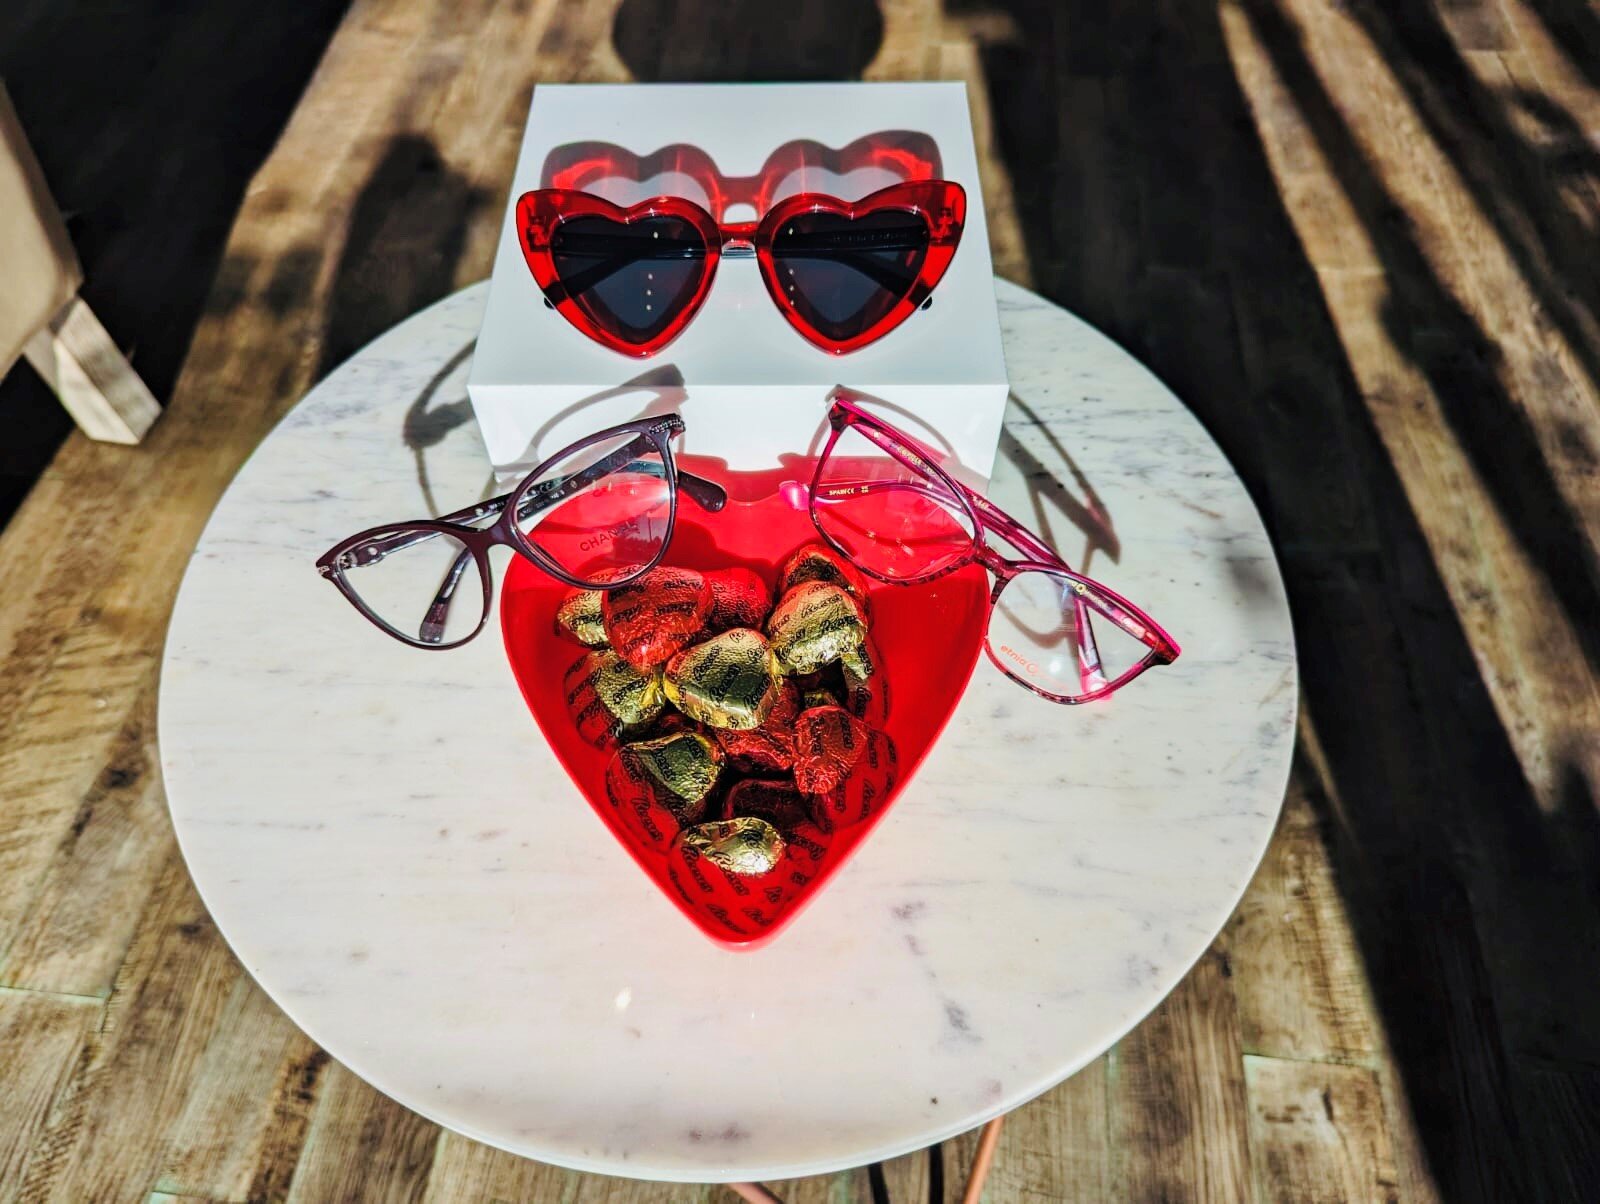 Start shopping for your Valentine's glasses now so you can have them ready for date night. 💕
 #valentinesglasses #valentinesday  #glassesboutique #edmondok #optiquevisioncenter